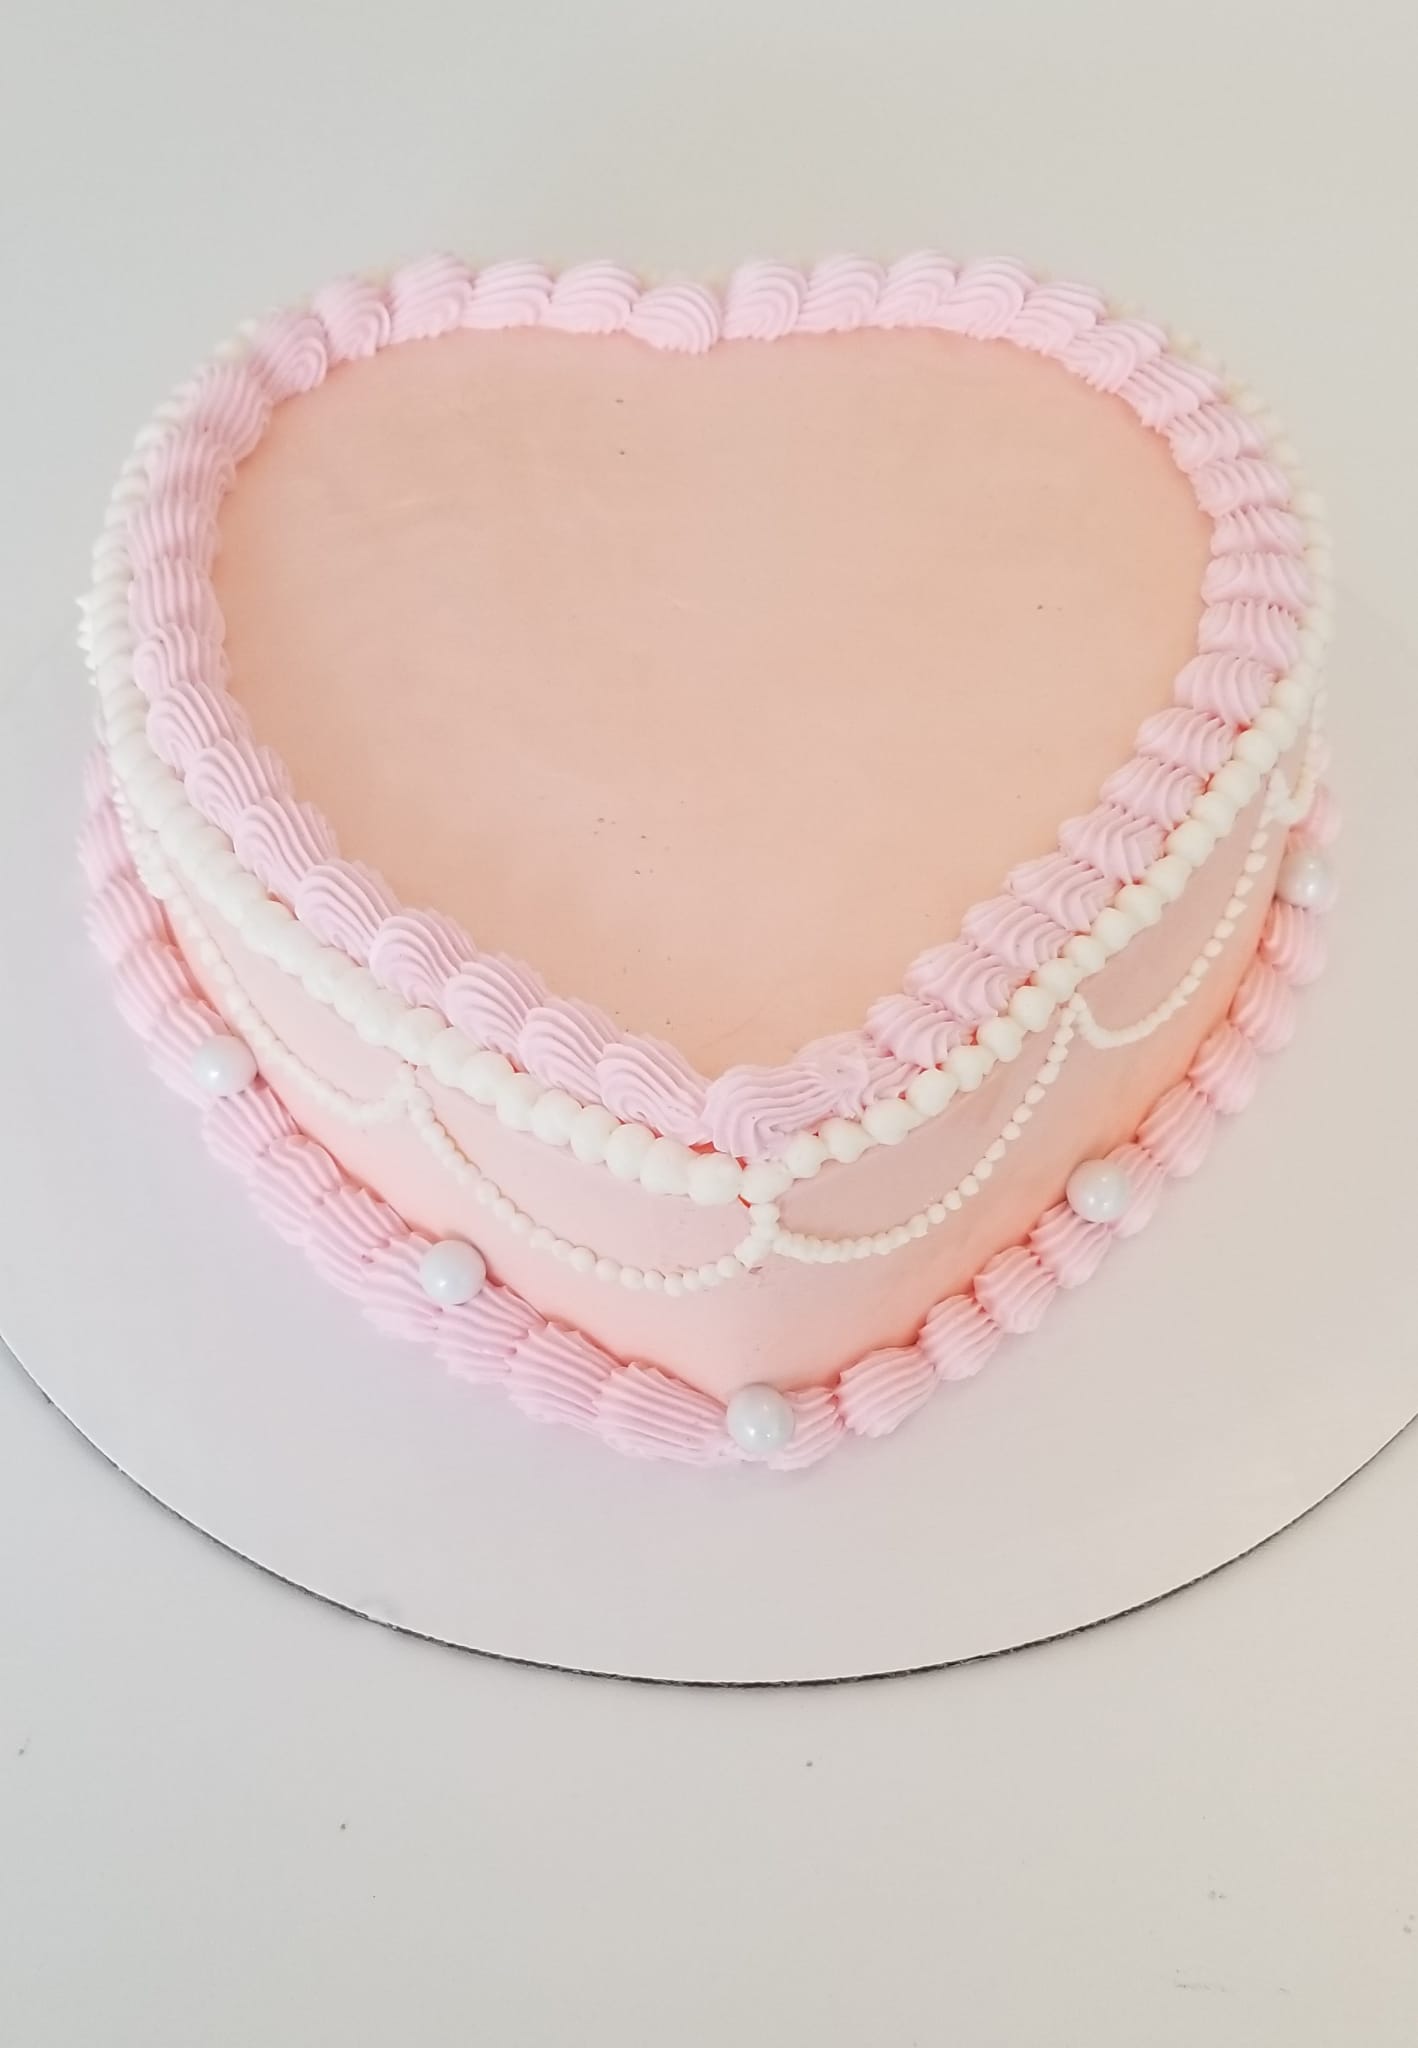 50 Layers of Happiness Birthday Cakes that Delight : Pink Buttercream Heart  Shape